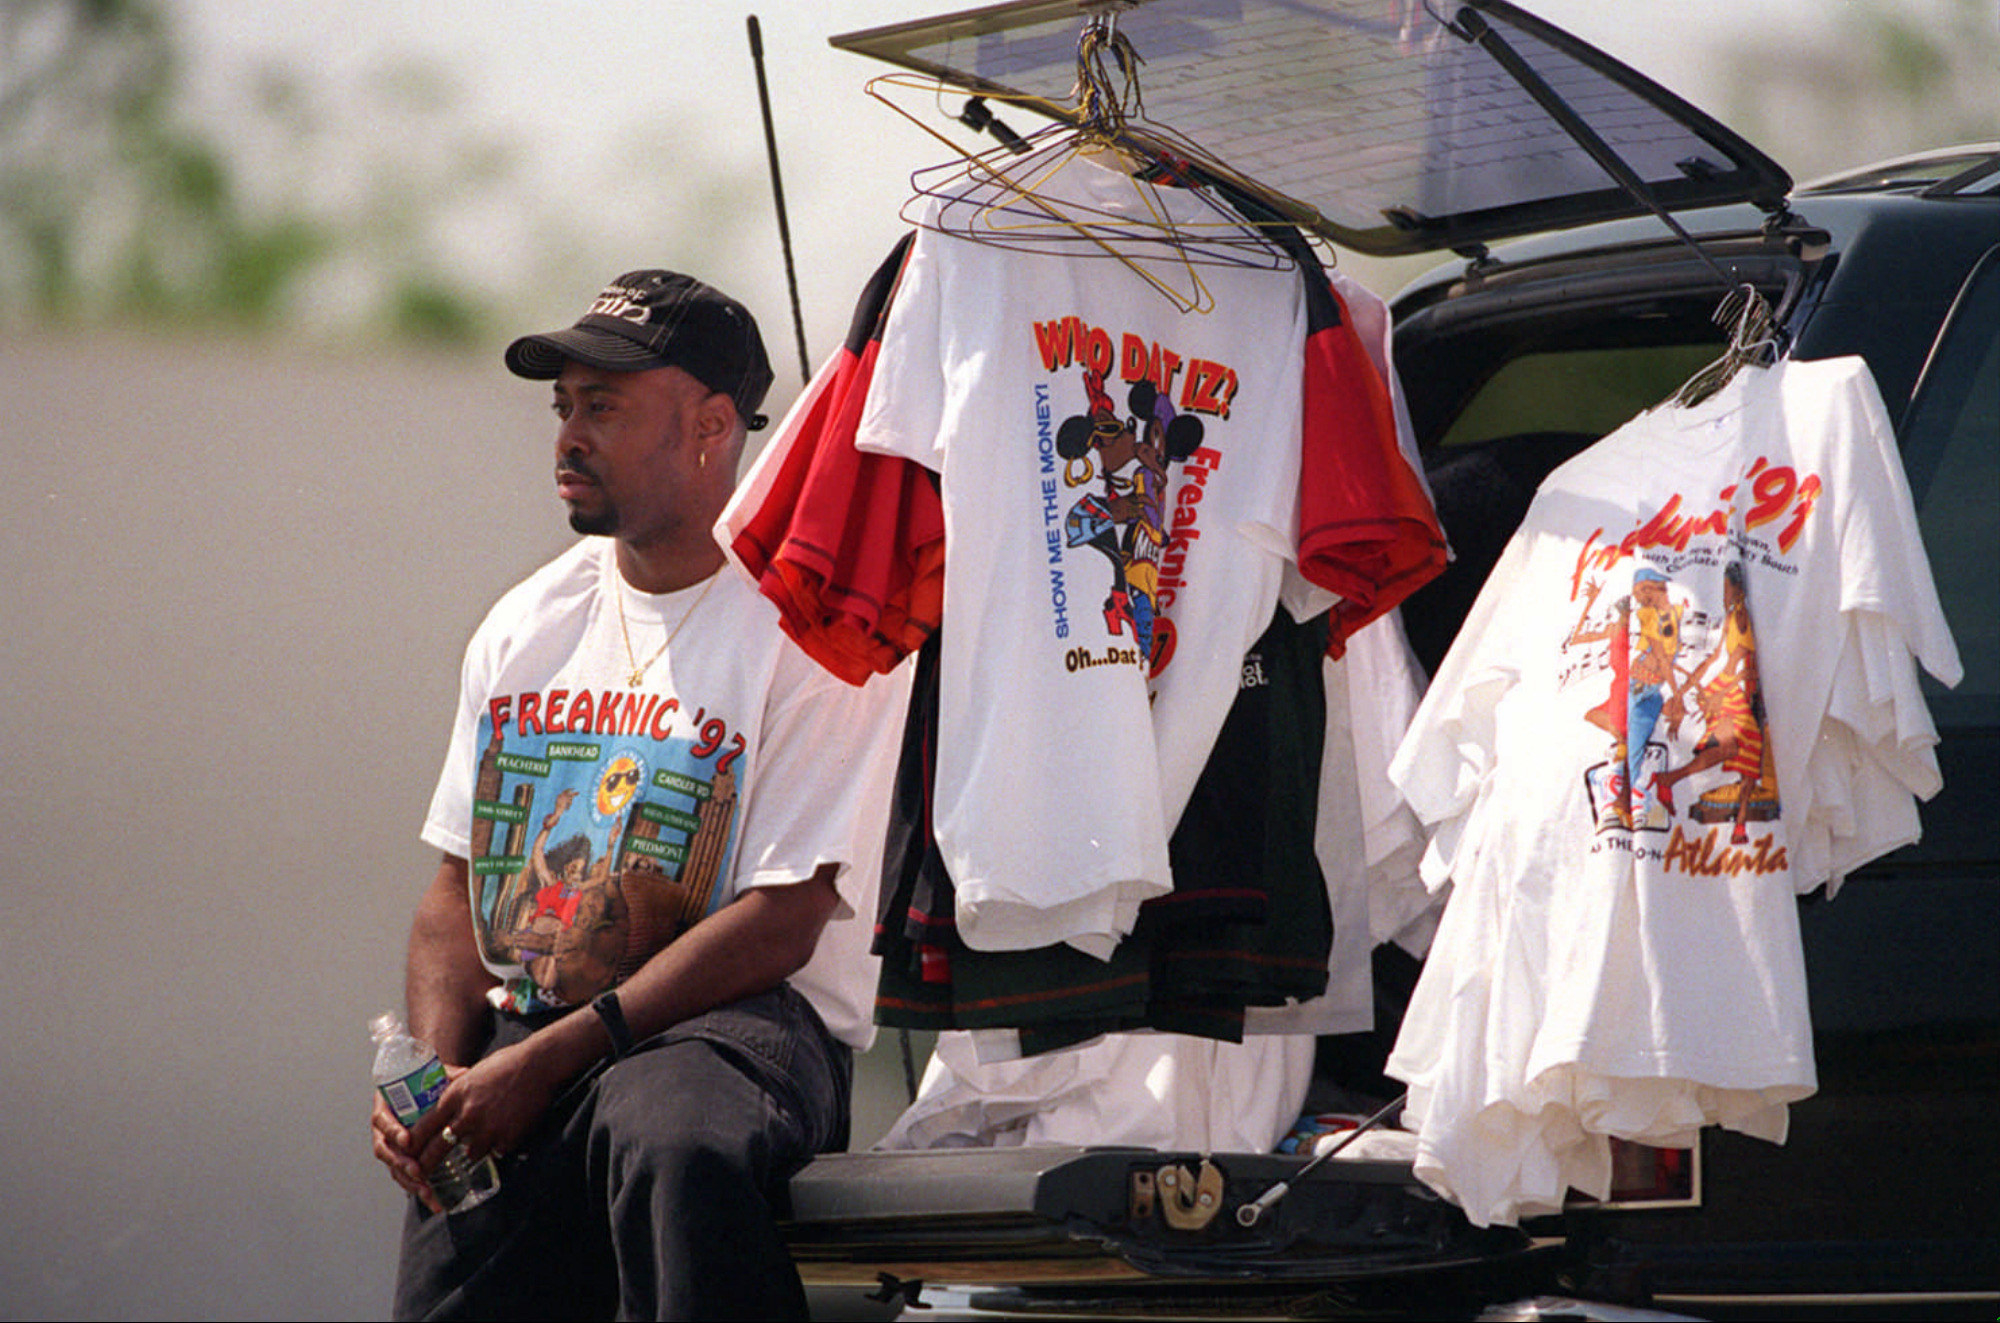 A man selling t shirts out of the back of his car for Freaknik 97 